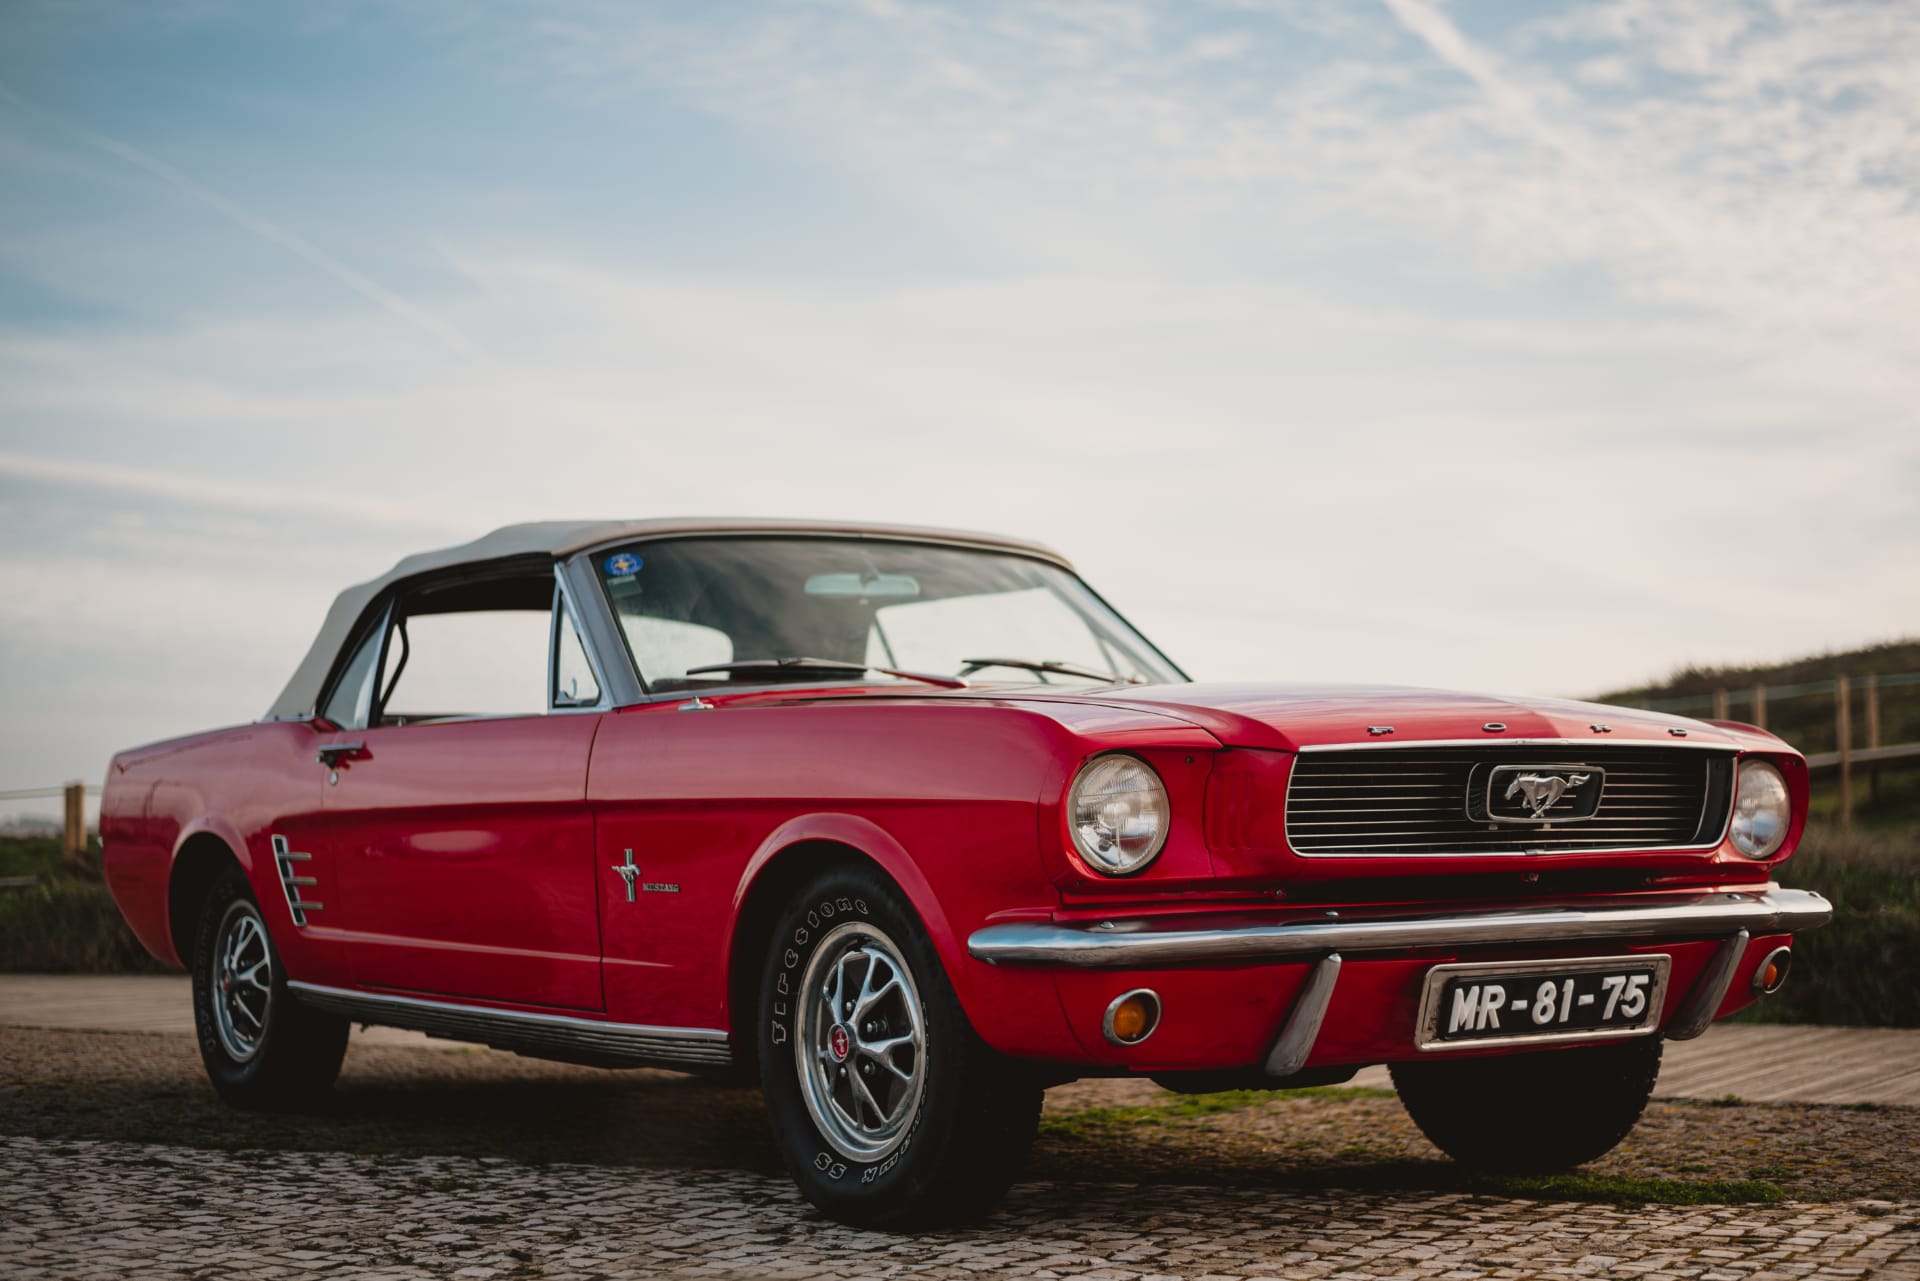 Ford Mustang Convertible (1965)